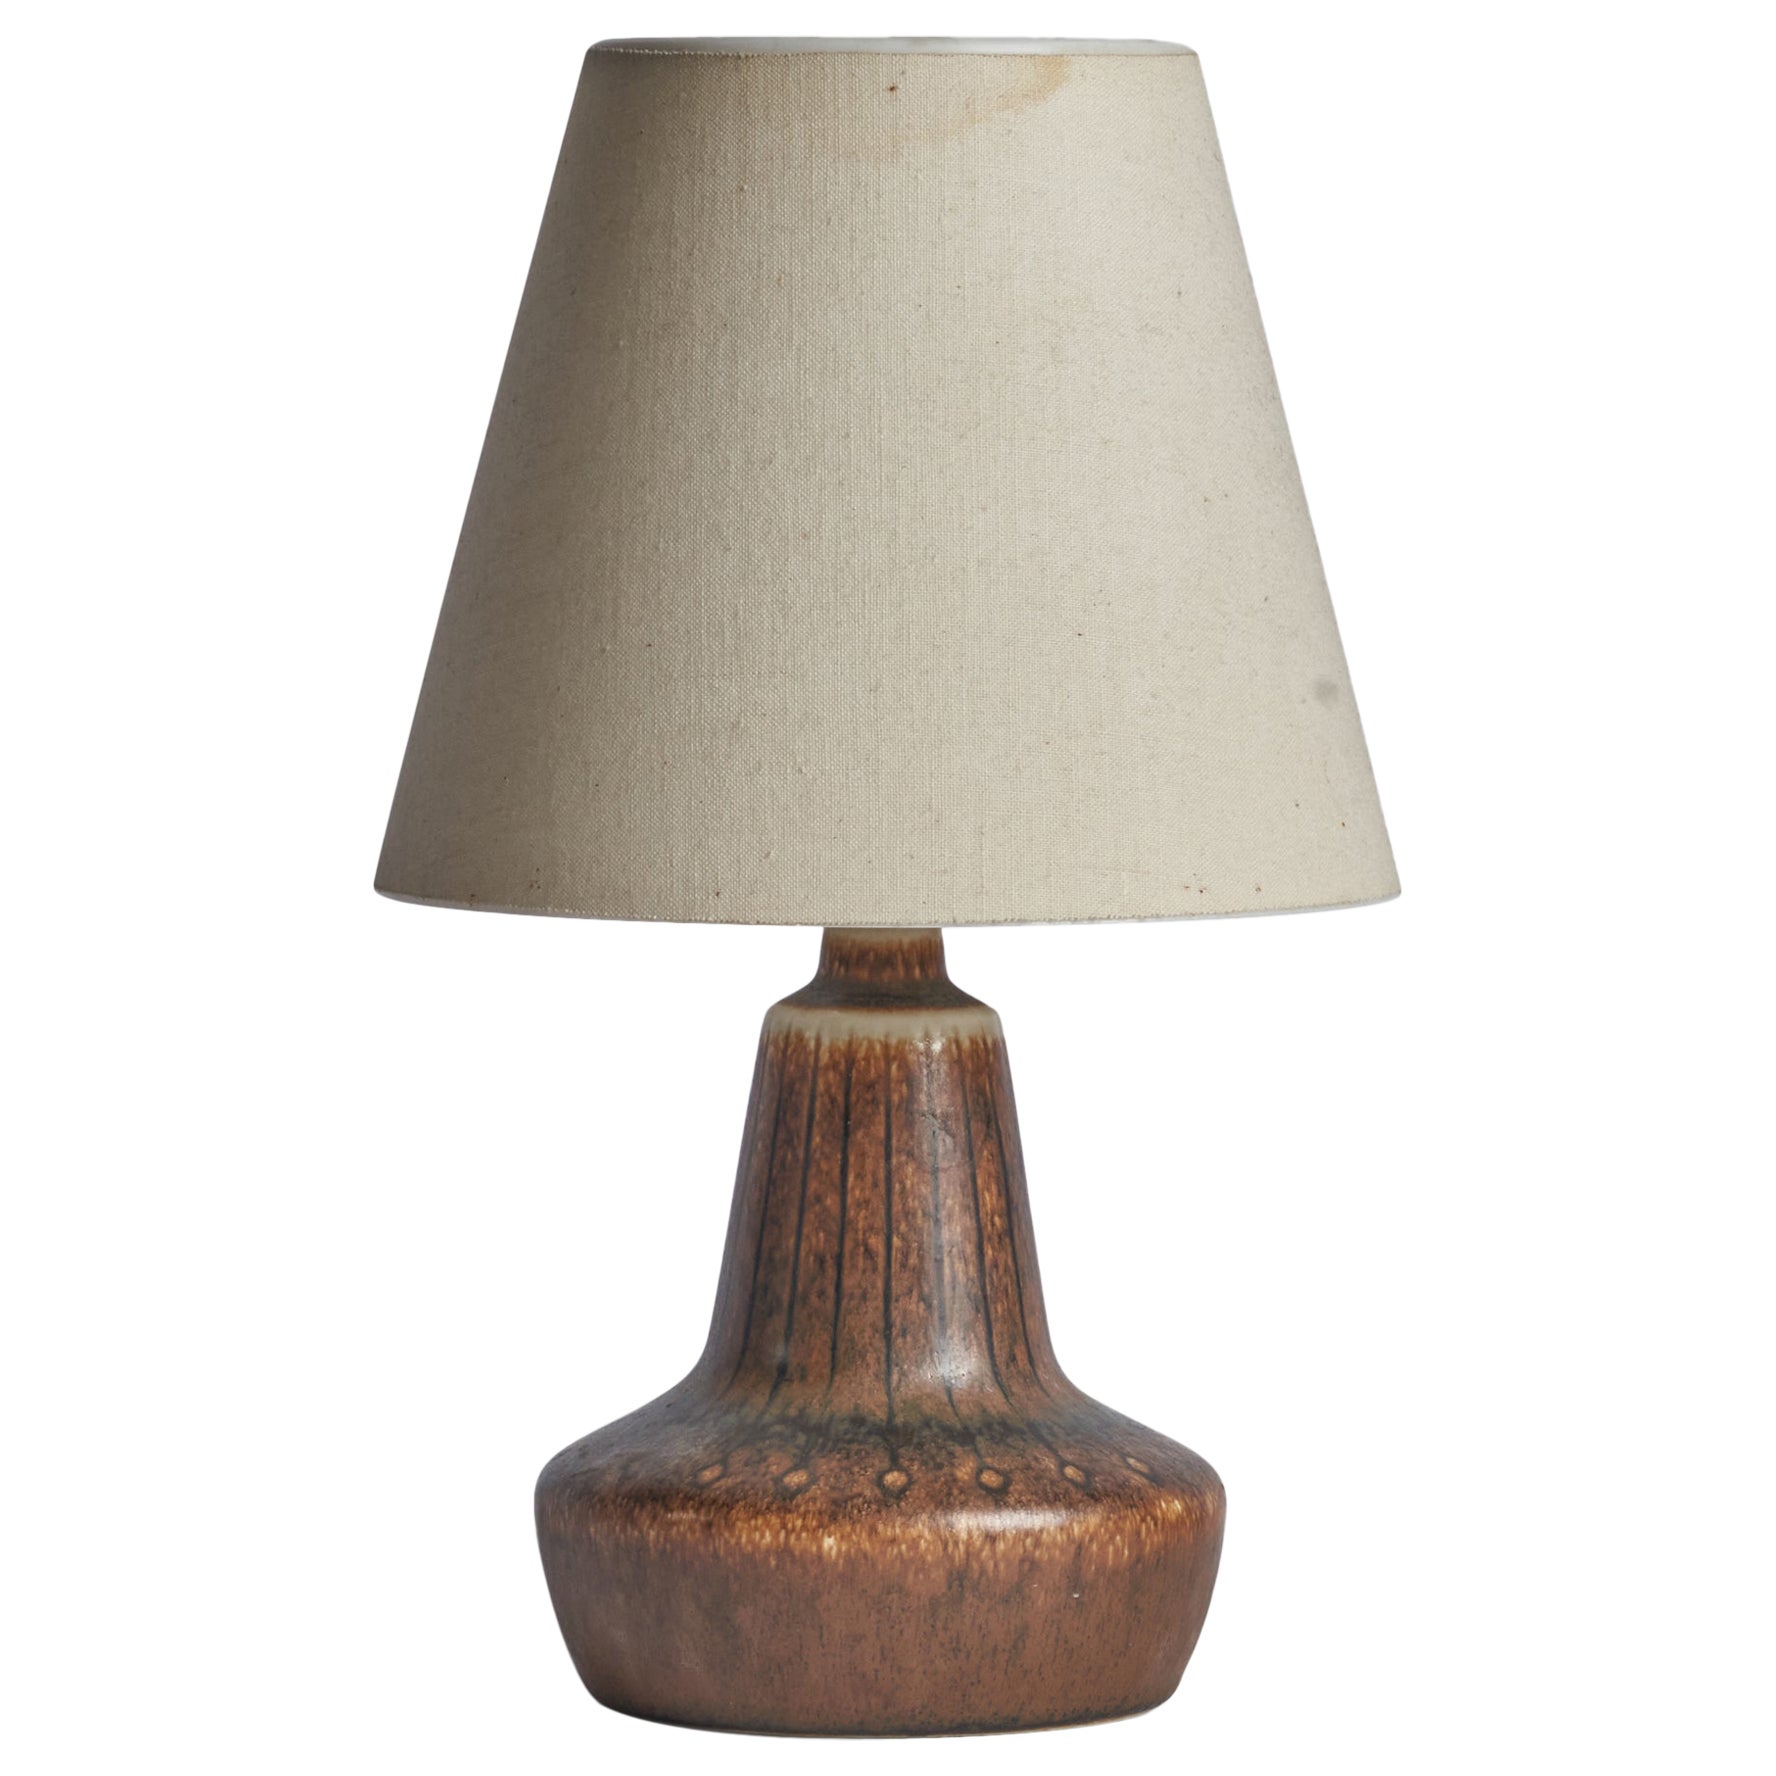 Gunnar Nylund, Table Lamp, Stoneware, Sweden, 1940s For Sale